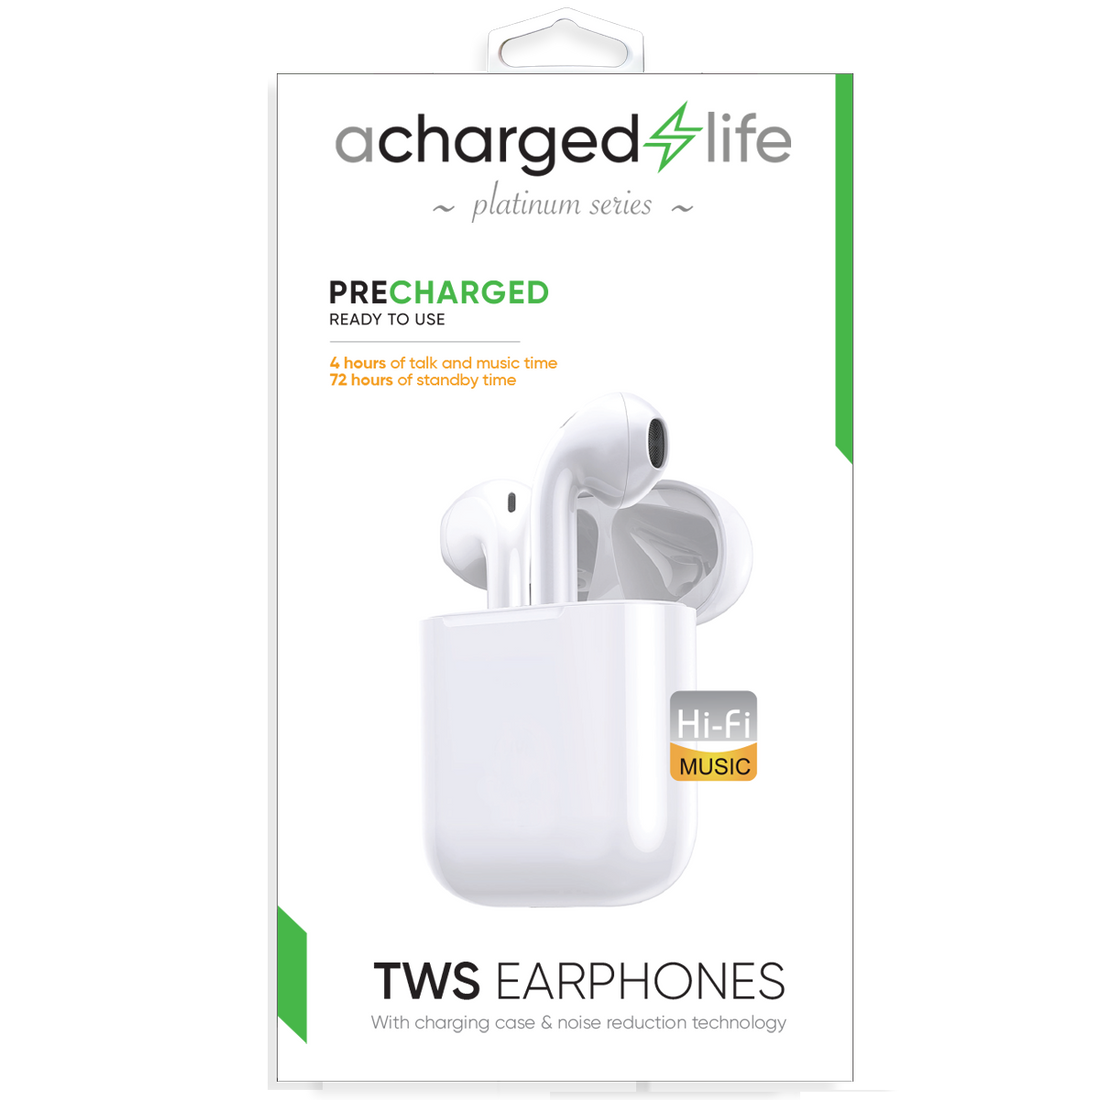 CL302 - TWS Water-Resistant Earphones 4 Hour Talk White - Pre-Charged (PLATINUM SERIES)